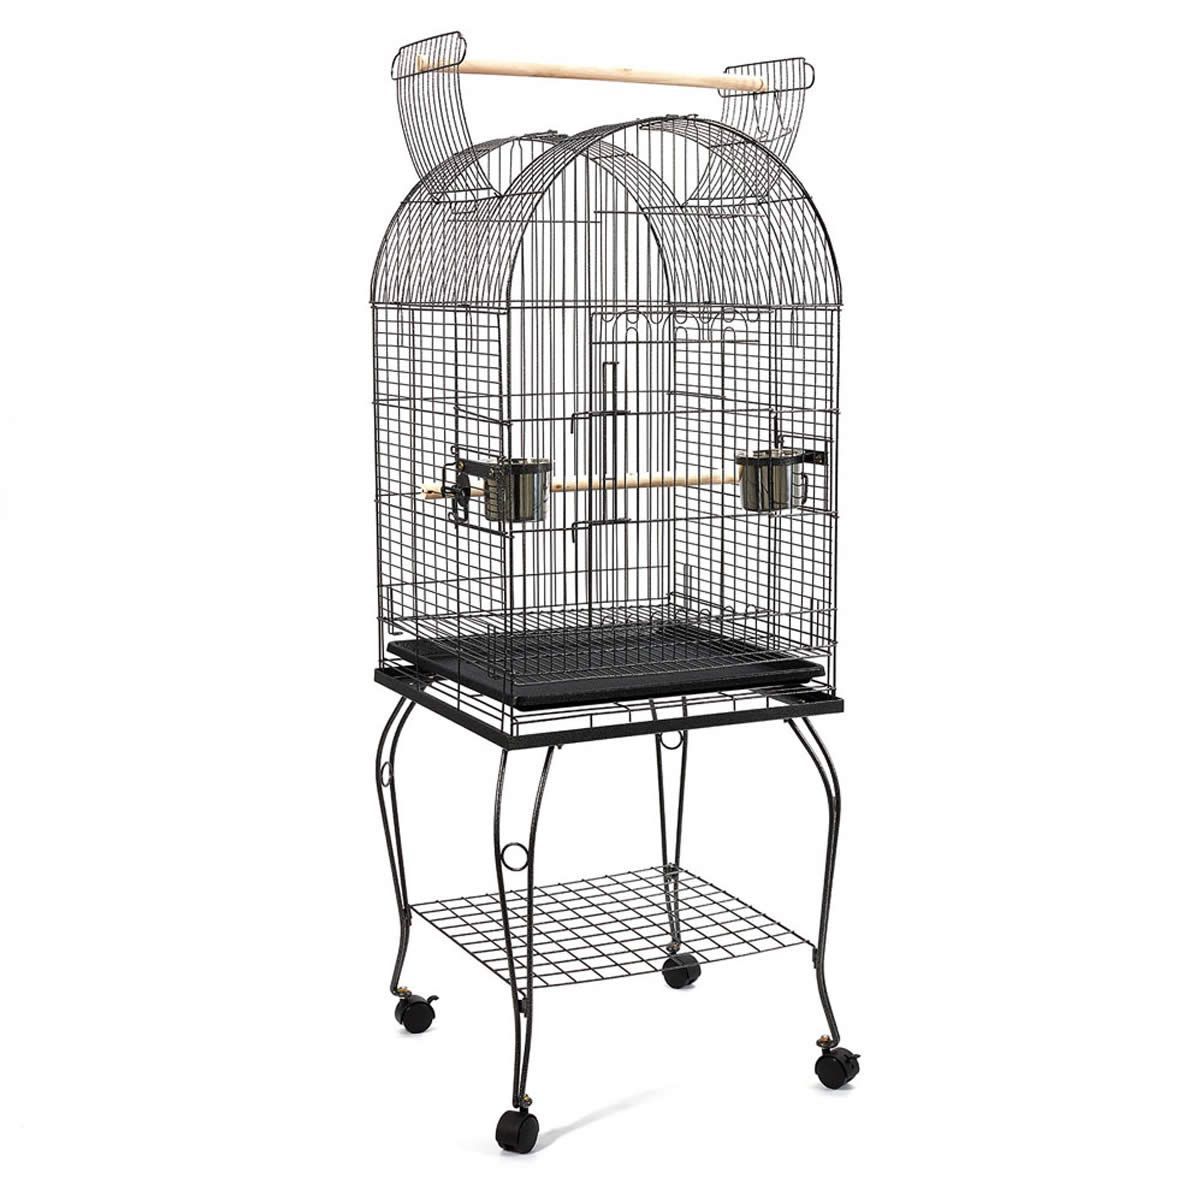 Pet Bird Cage with Stainless Steel Feeders - Black